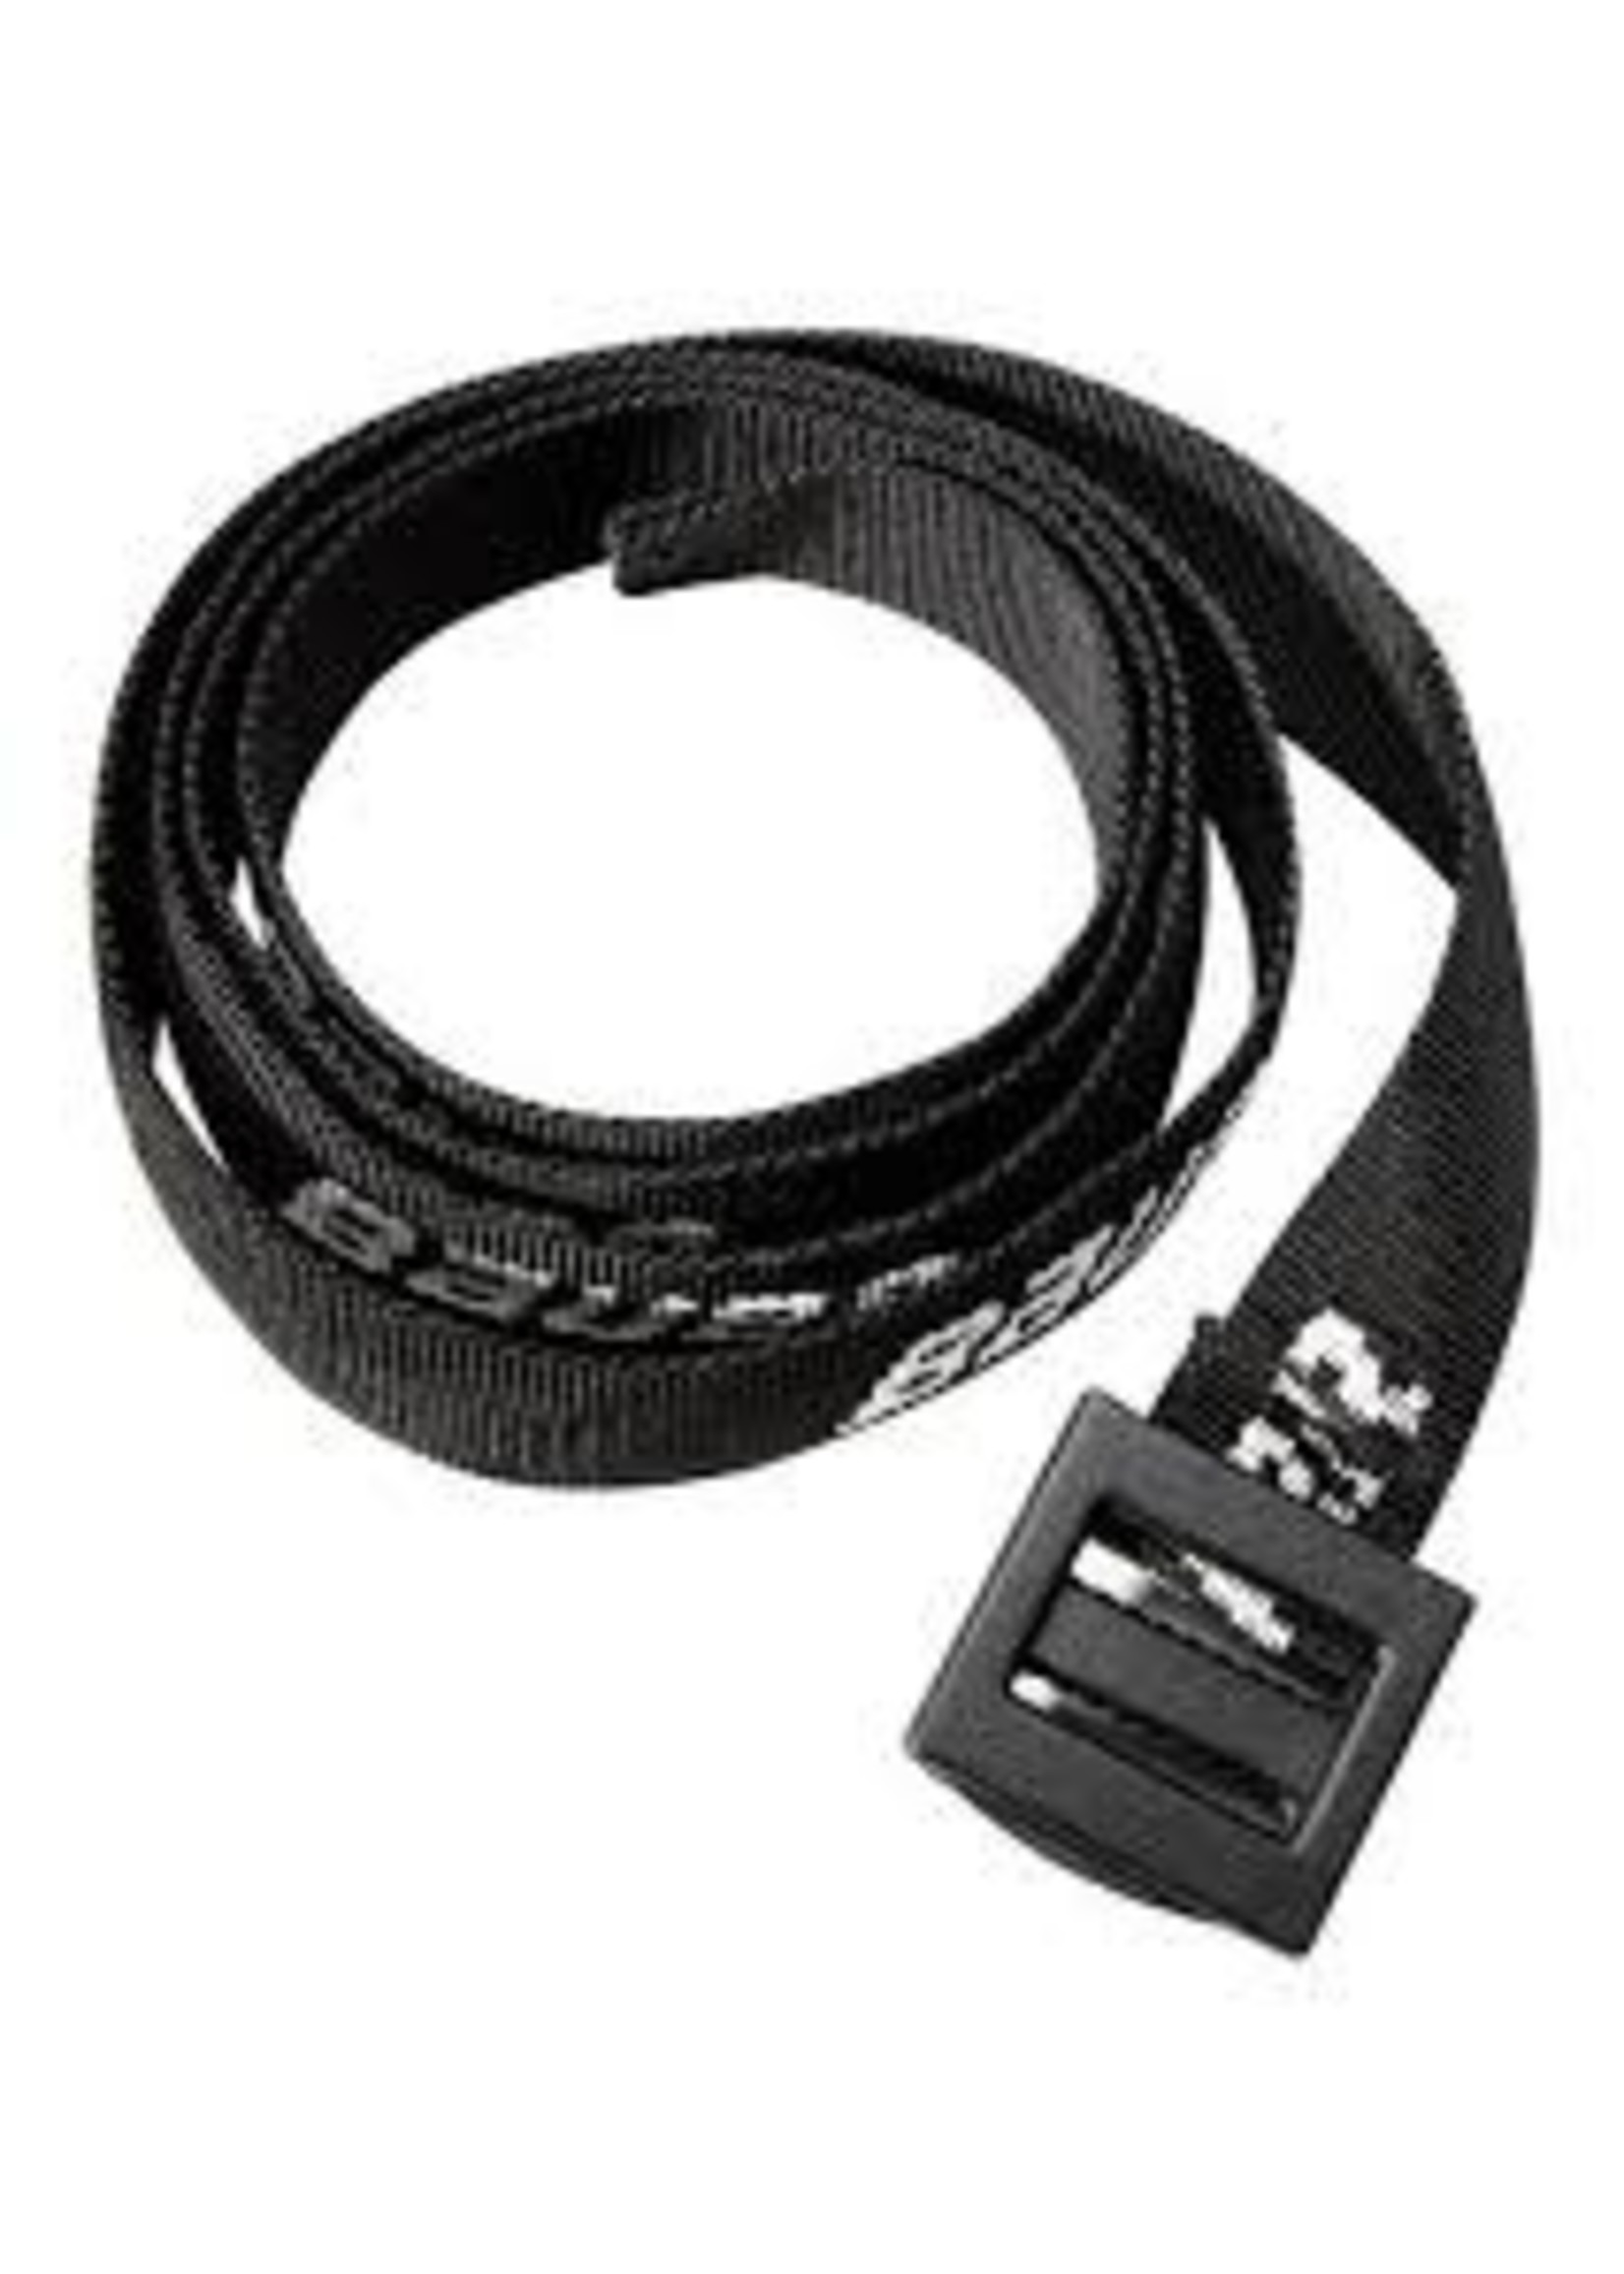 BAUER HOCKEY PANT REPLACEMENT BELT EACH